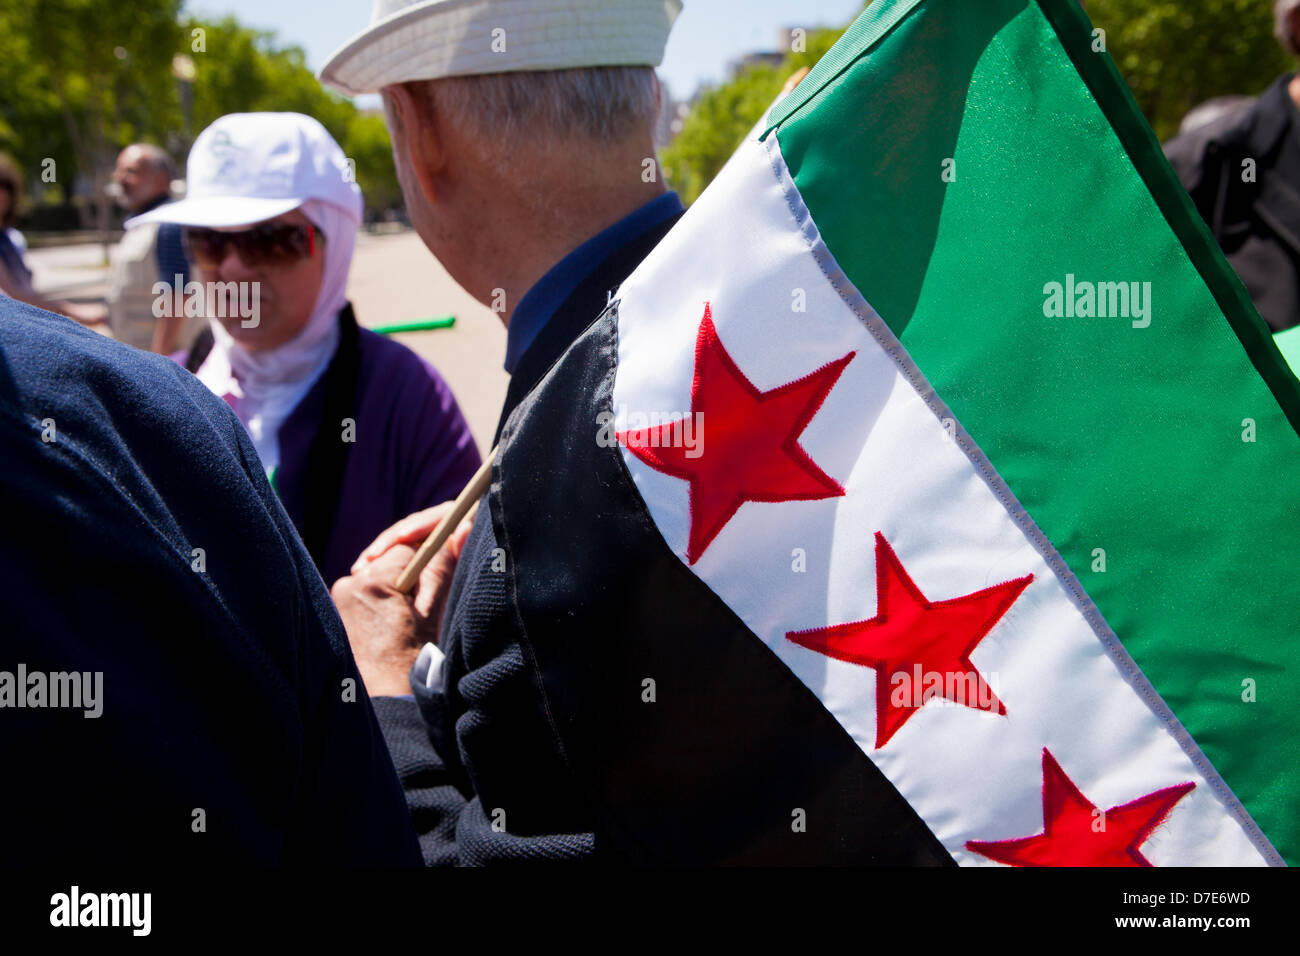 Syrians in front of the White House to express anger and protest - Washington, DC USA Stock Photo